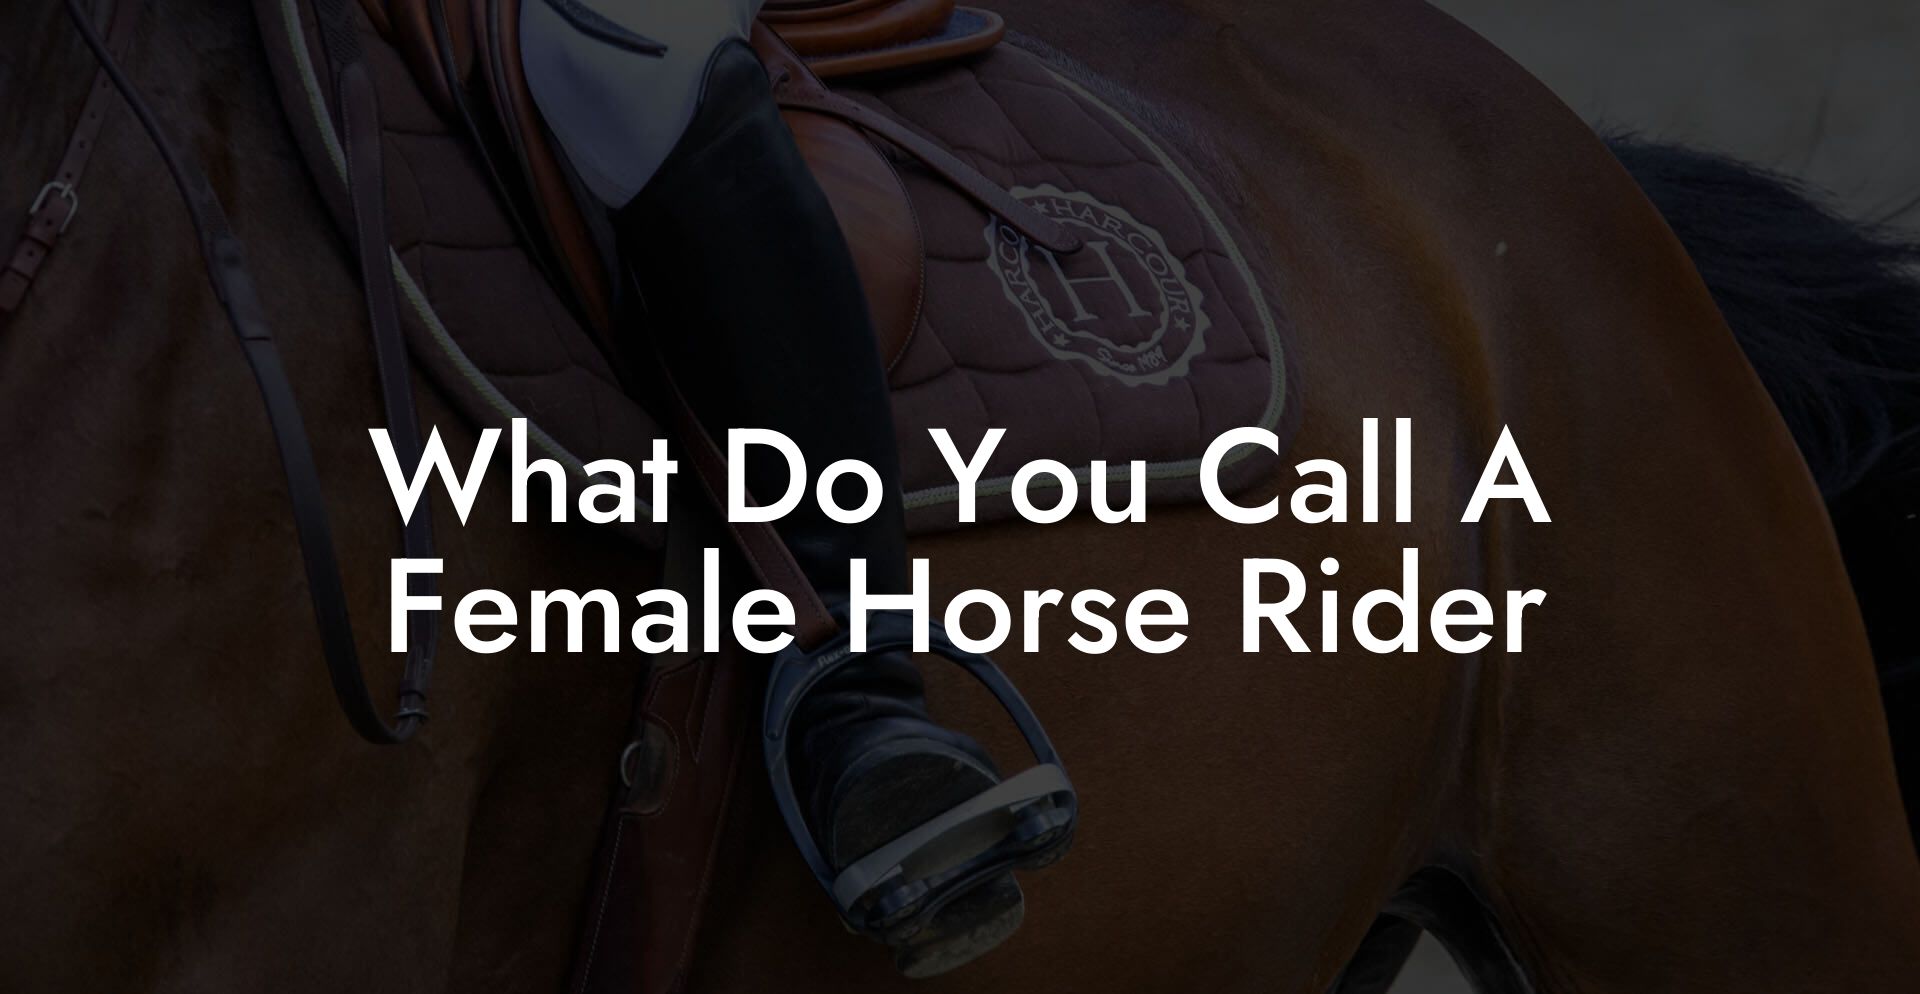 What Do You Call A Female Horse Rider